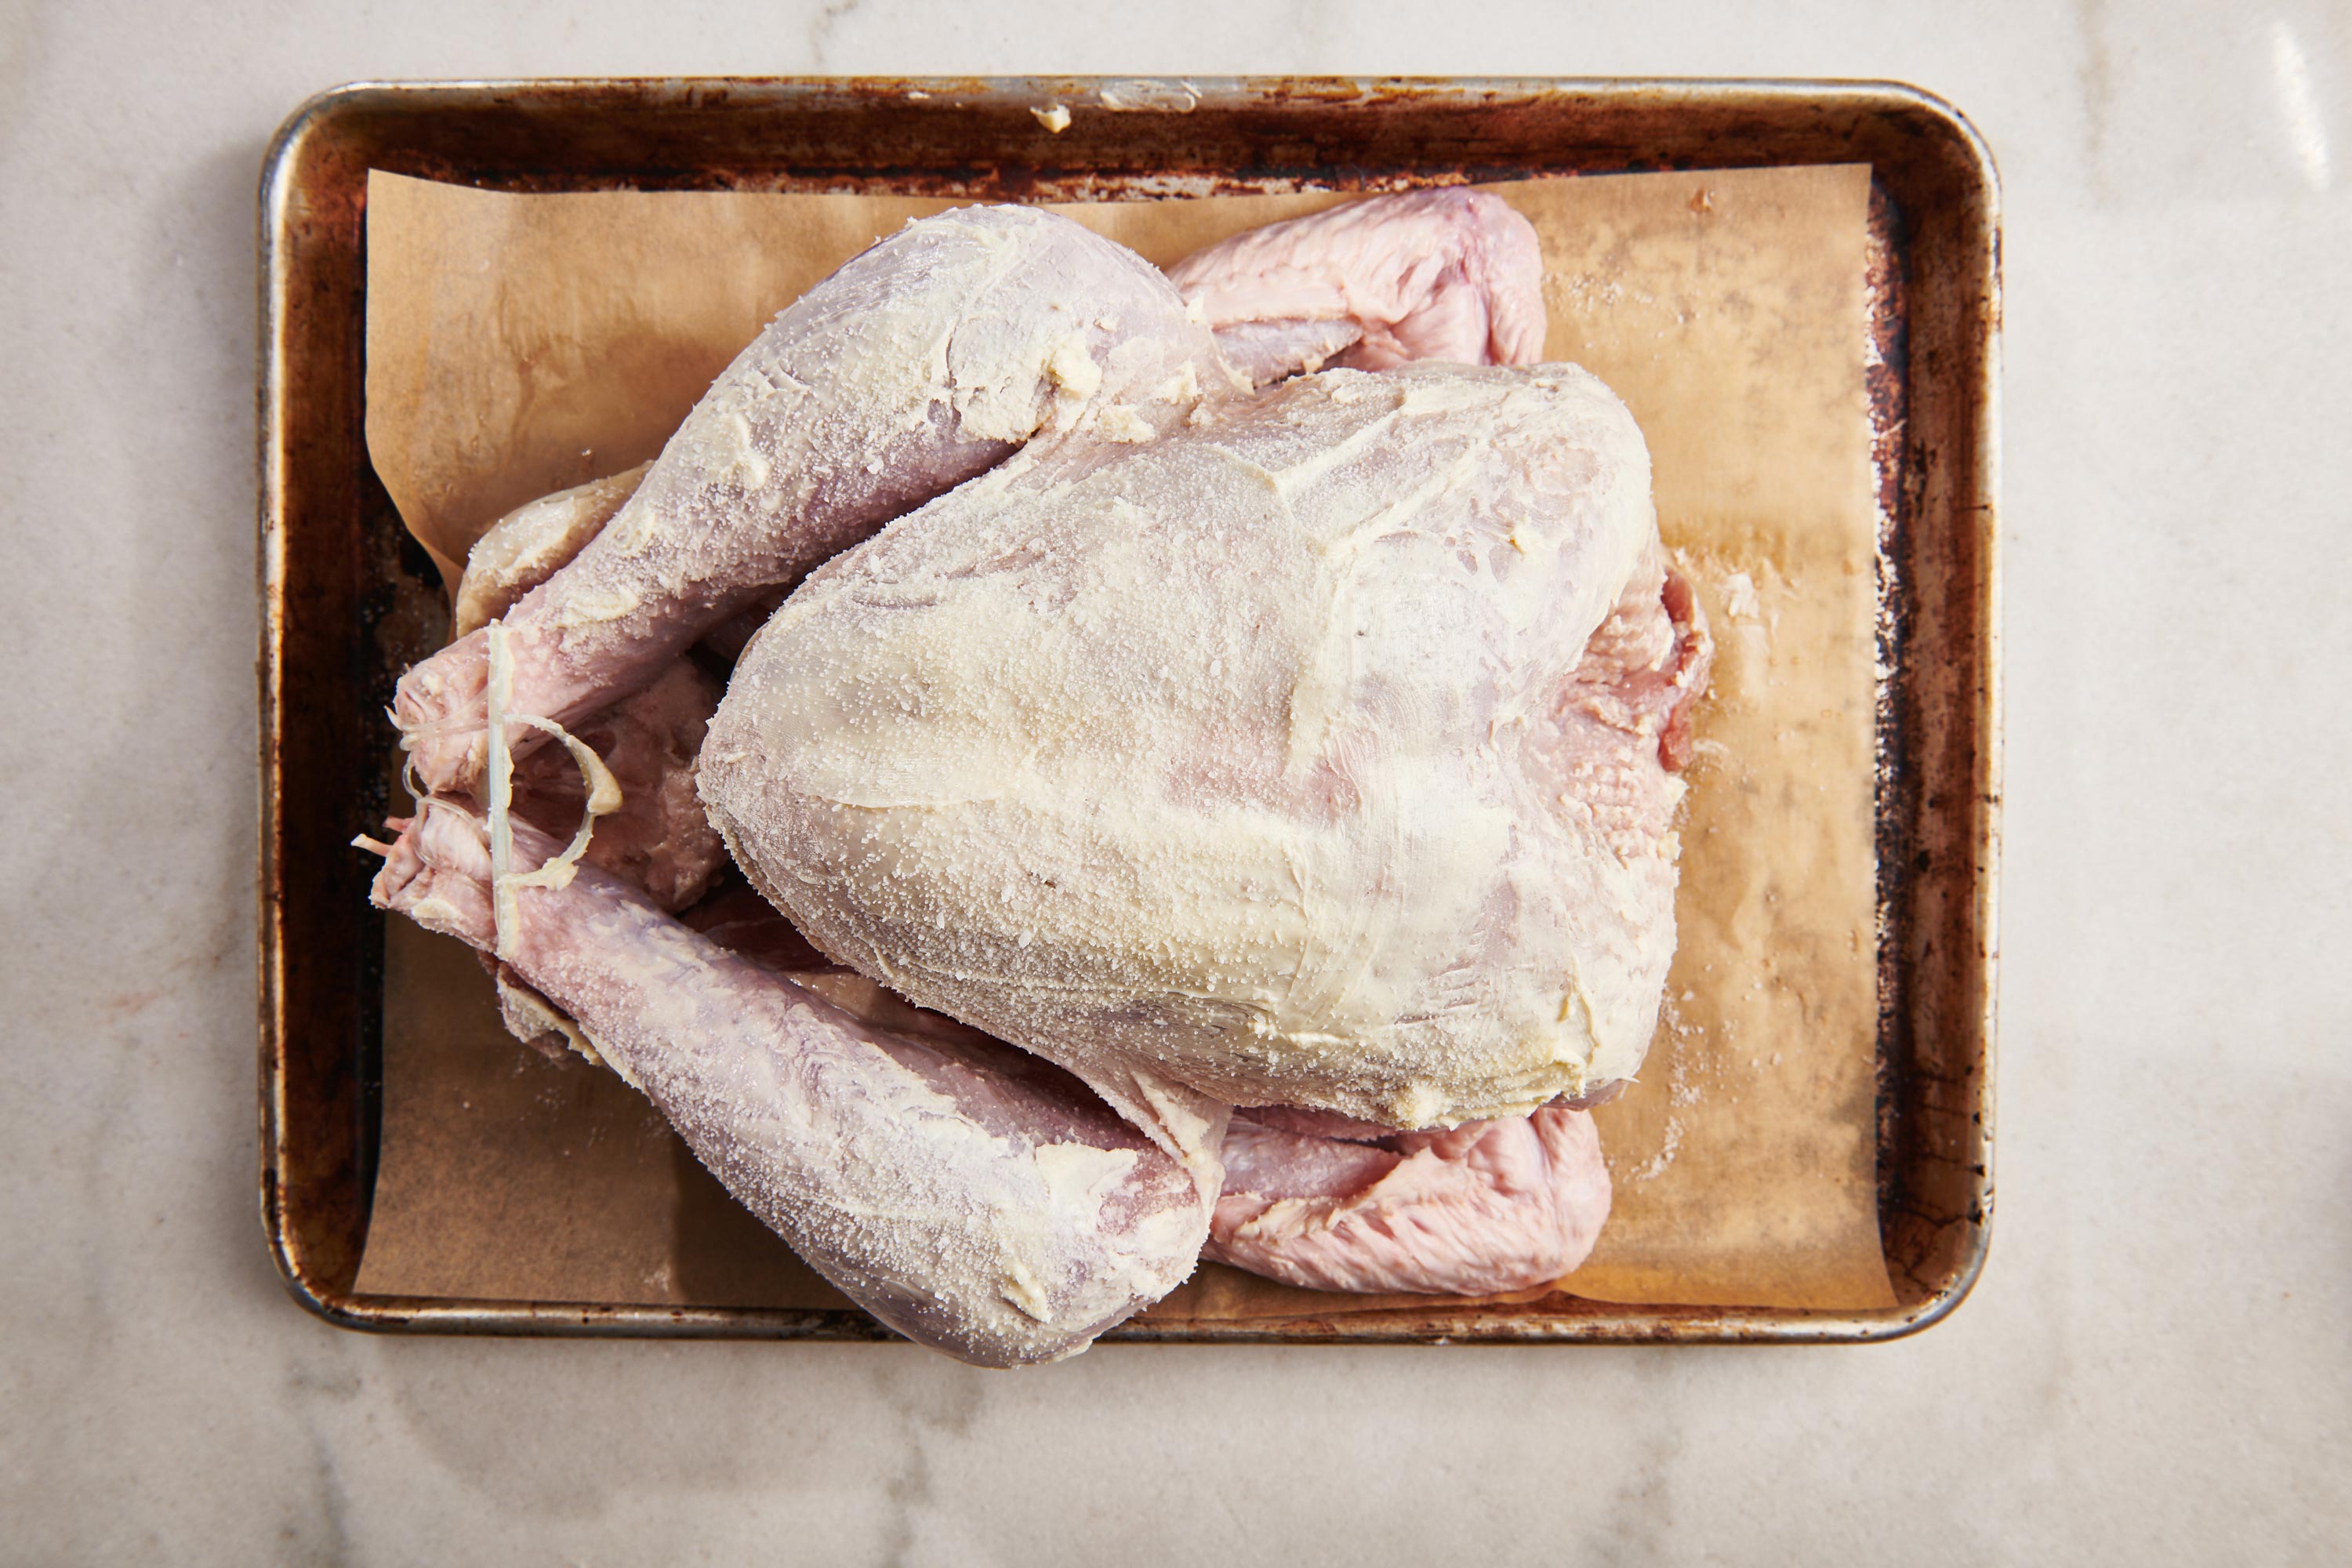 Uncooked trussed turkey smeared with butter on a baking sheet.